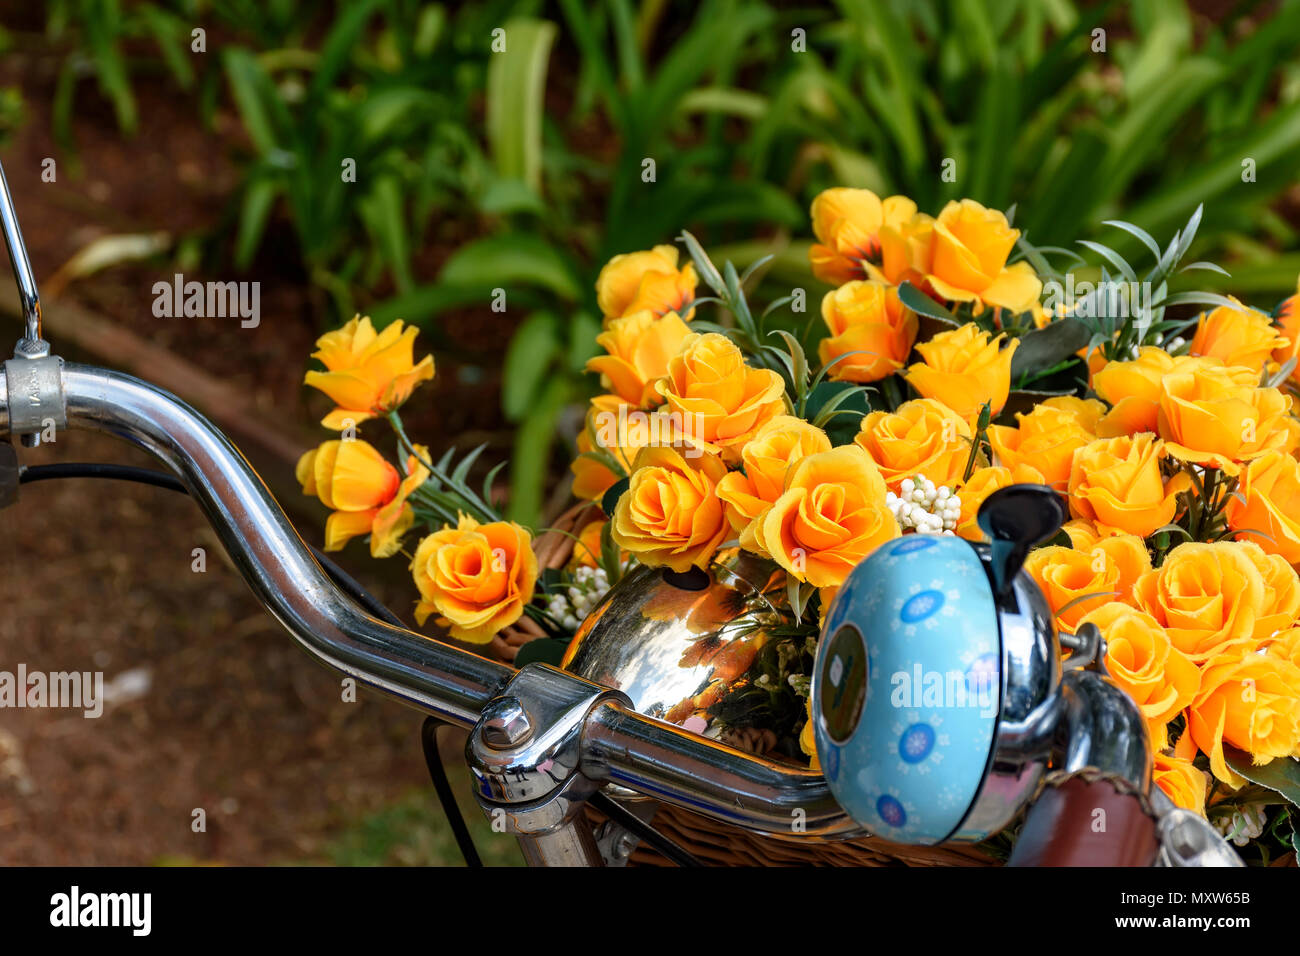 Old bicycle parked in park with yellow artificial flowers in your basket Stock Photo